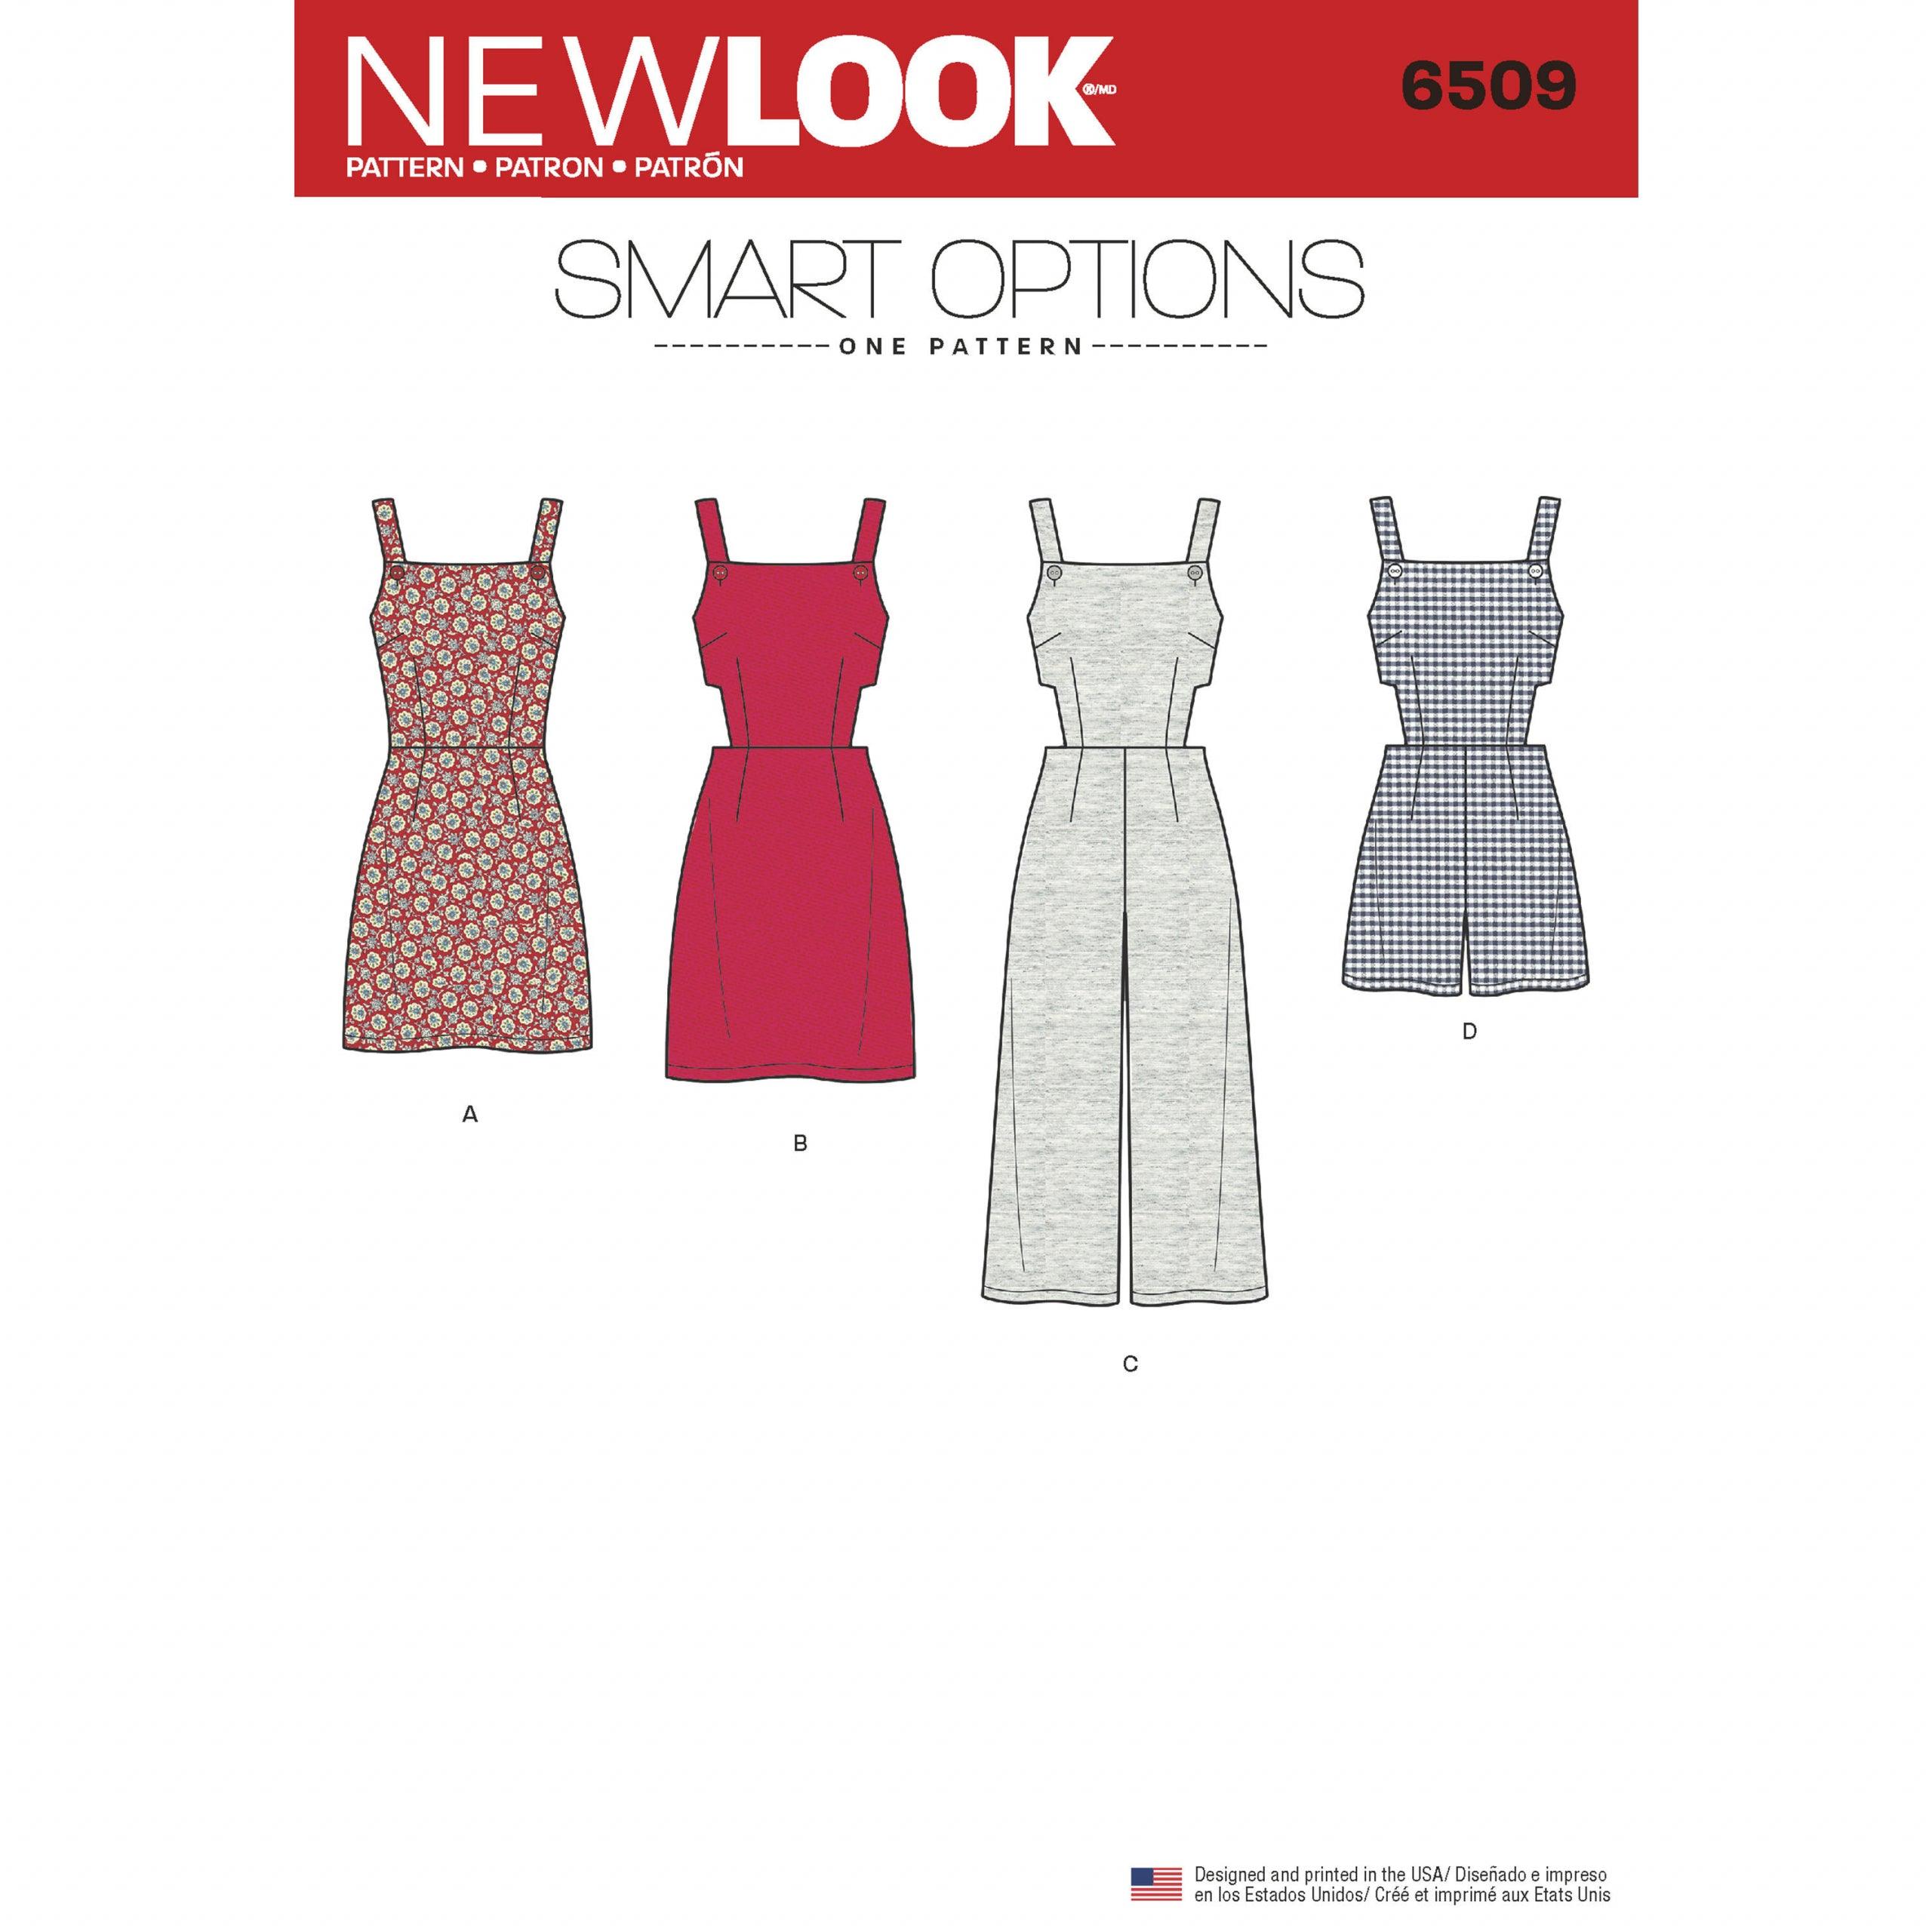 New Look 6509 Romper/Dress with Bodice Variations Sewing Pattern